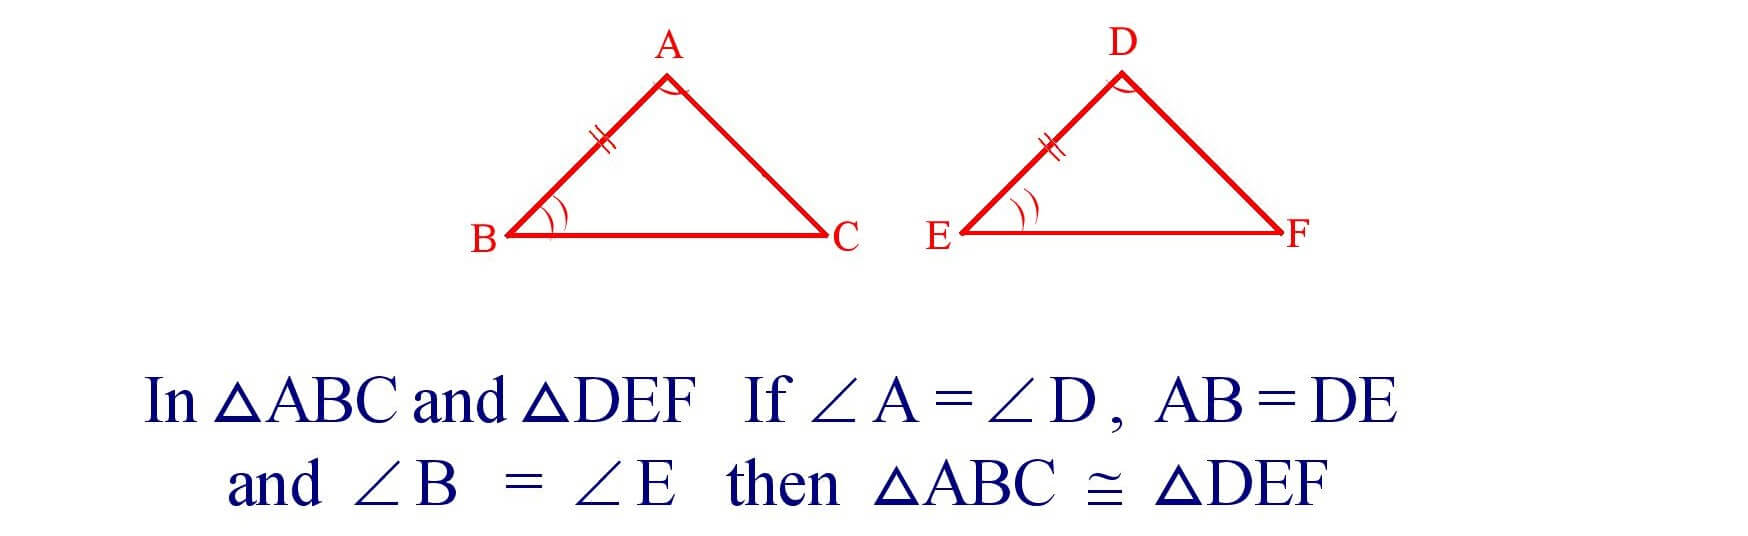 A - S - A Congruence of Triangles